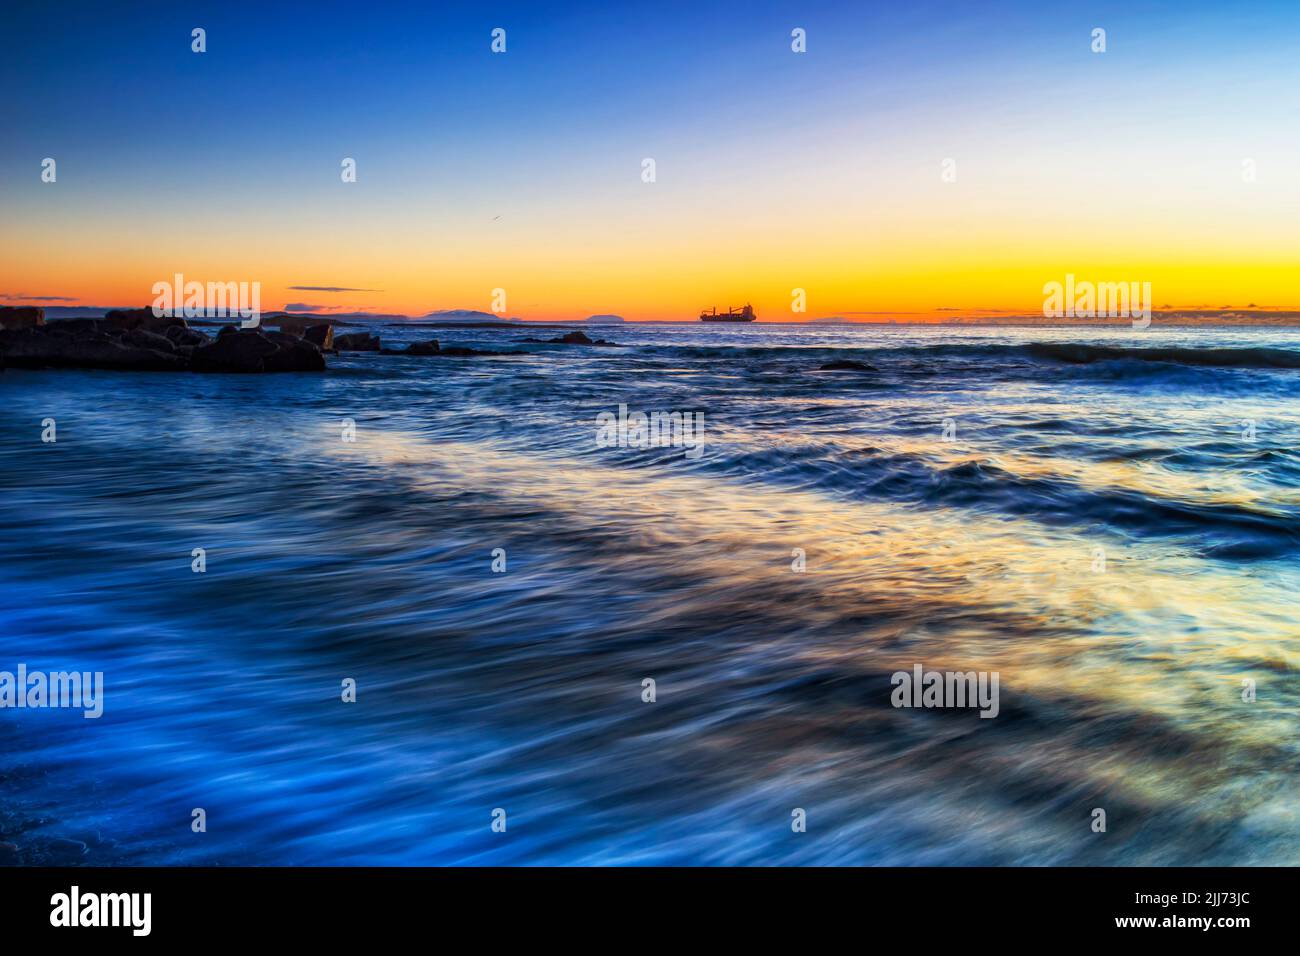 Blurred waves on Pebbly beach in Forster town on Pacific coast of Australia with distant ship on horizon at sunrise. Stock Photo